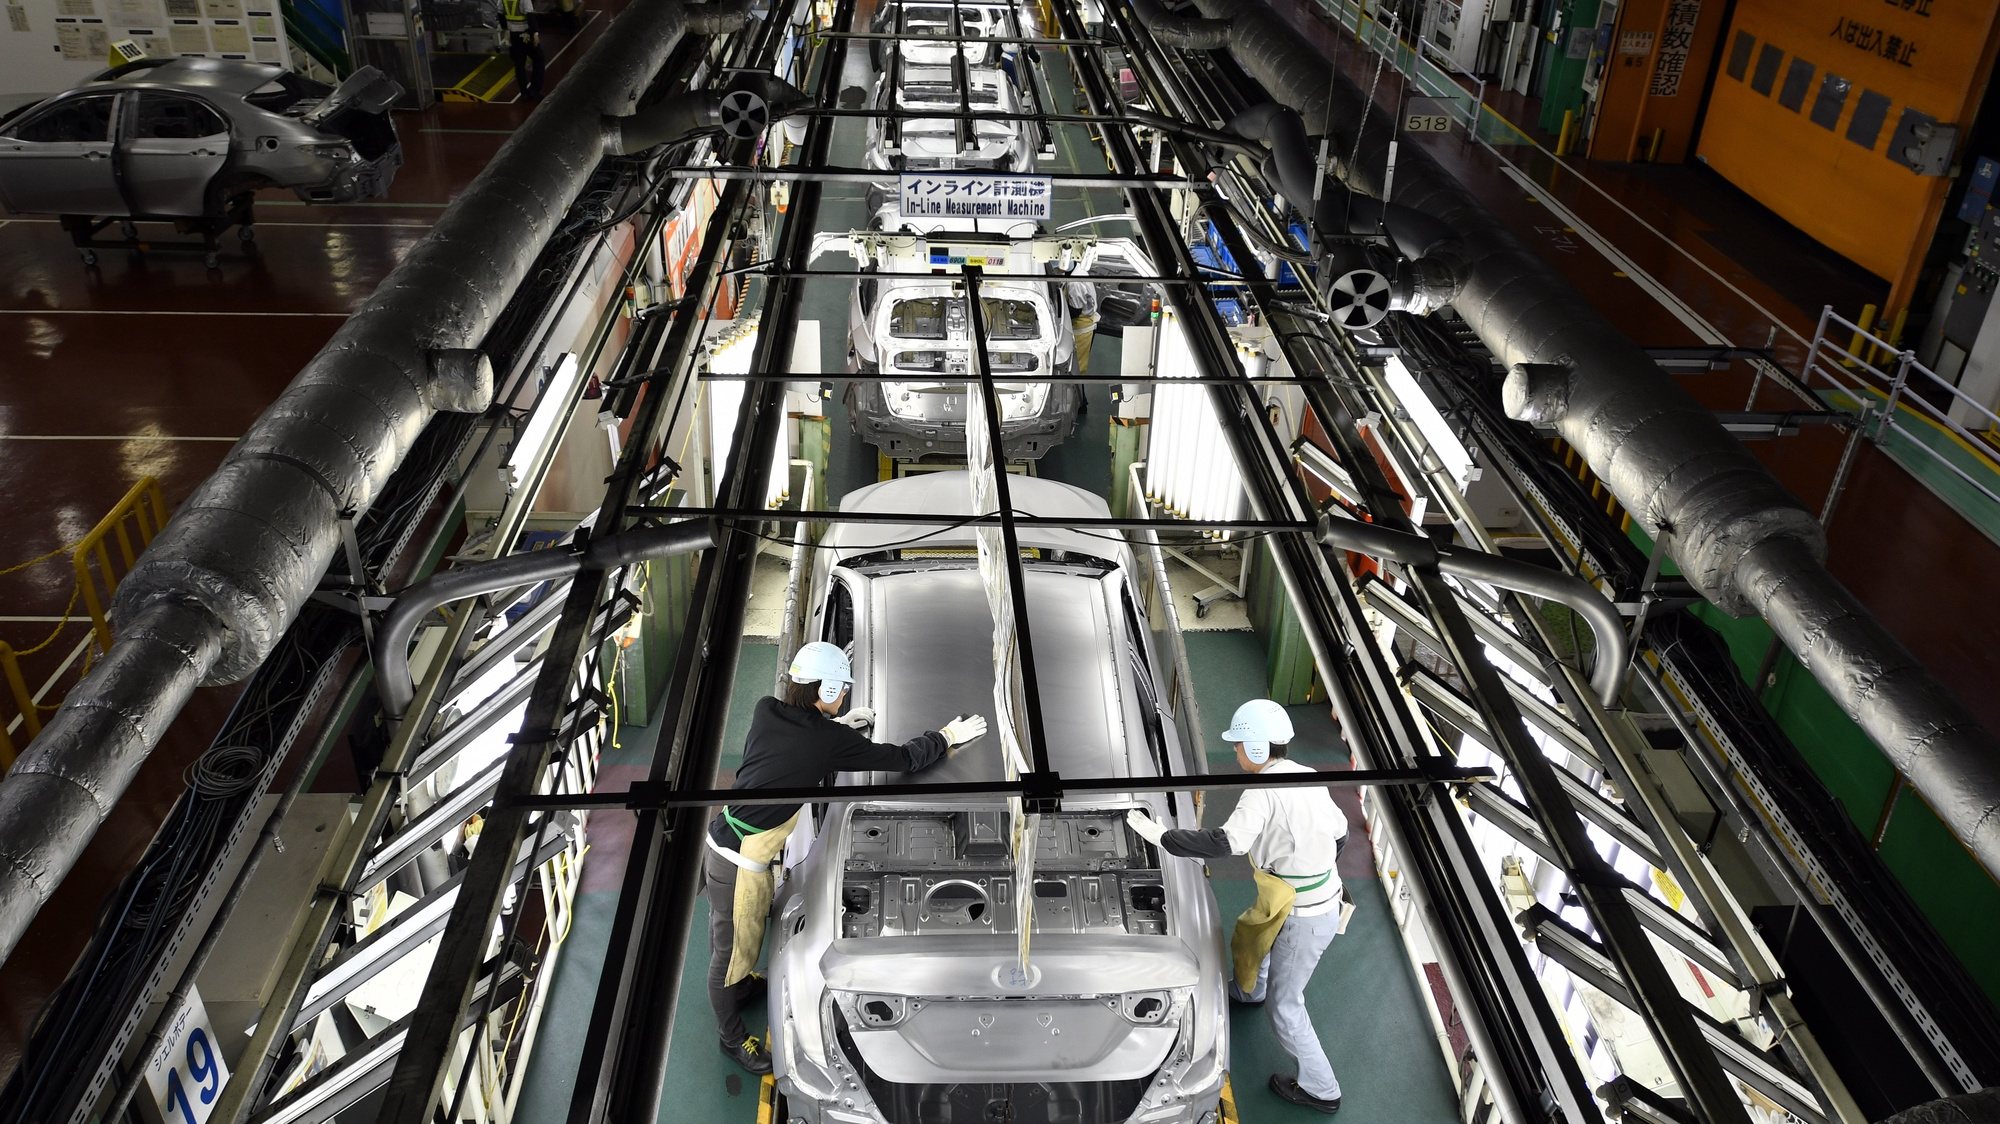 epa10826362 (FILE) - Workers check the surface of vehicles at the Toyota Tsutsumi car assembly plant in Toyota, near Nagoya, central Japan, 08 December 2017 (reissued 29 August 2023). Toyota Motor Corporation announced on 29 August 2023 that production lines at 12 plants in Japan had been shut down since the morning due to a failure in the automaker&#039;s computer system managing parts orders. Additional lines at two other plants are also scheduled to stop production in the evening, causing the suspension of all vehicle production in Japan. The cause is under investigation.  EPA/FRANCK ROBICHON